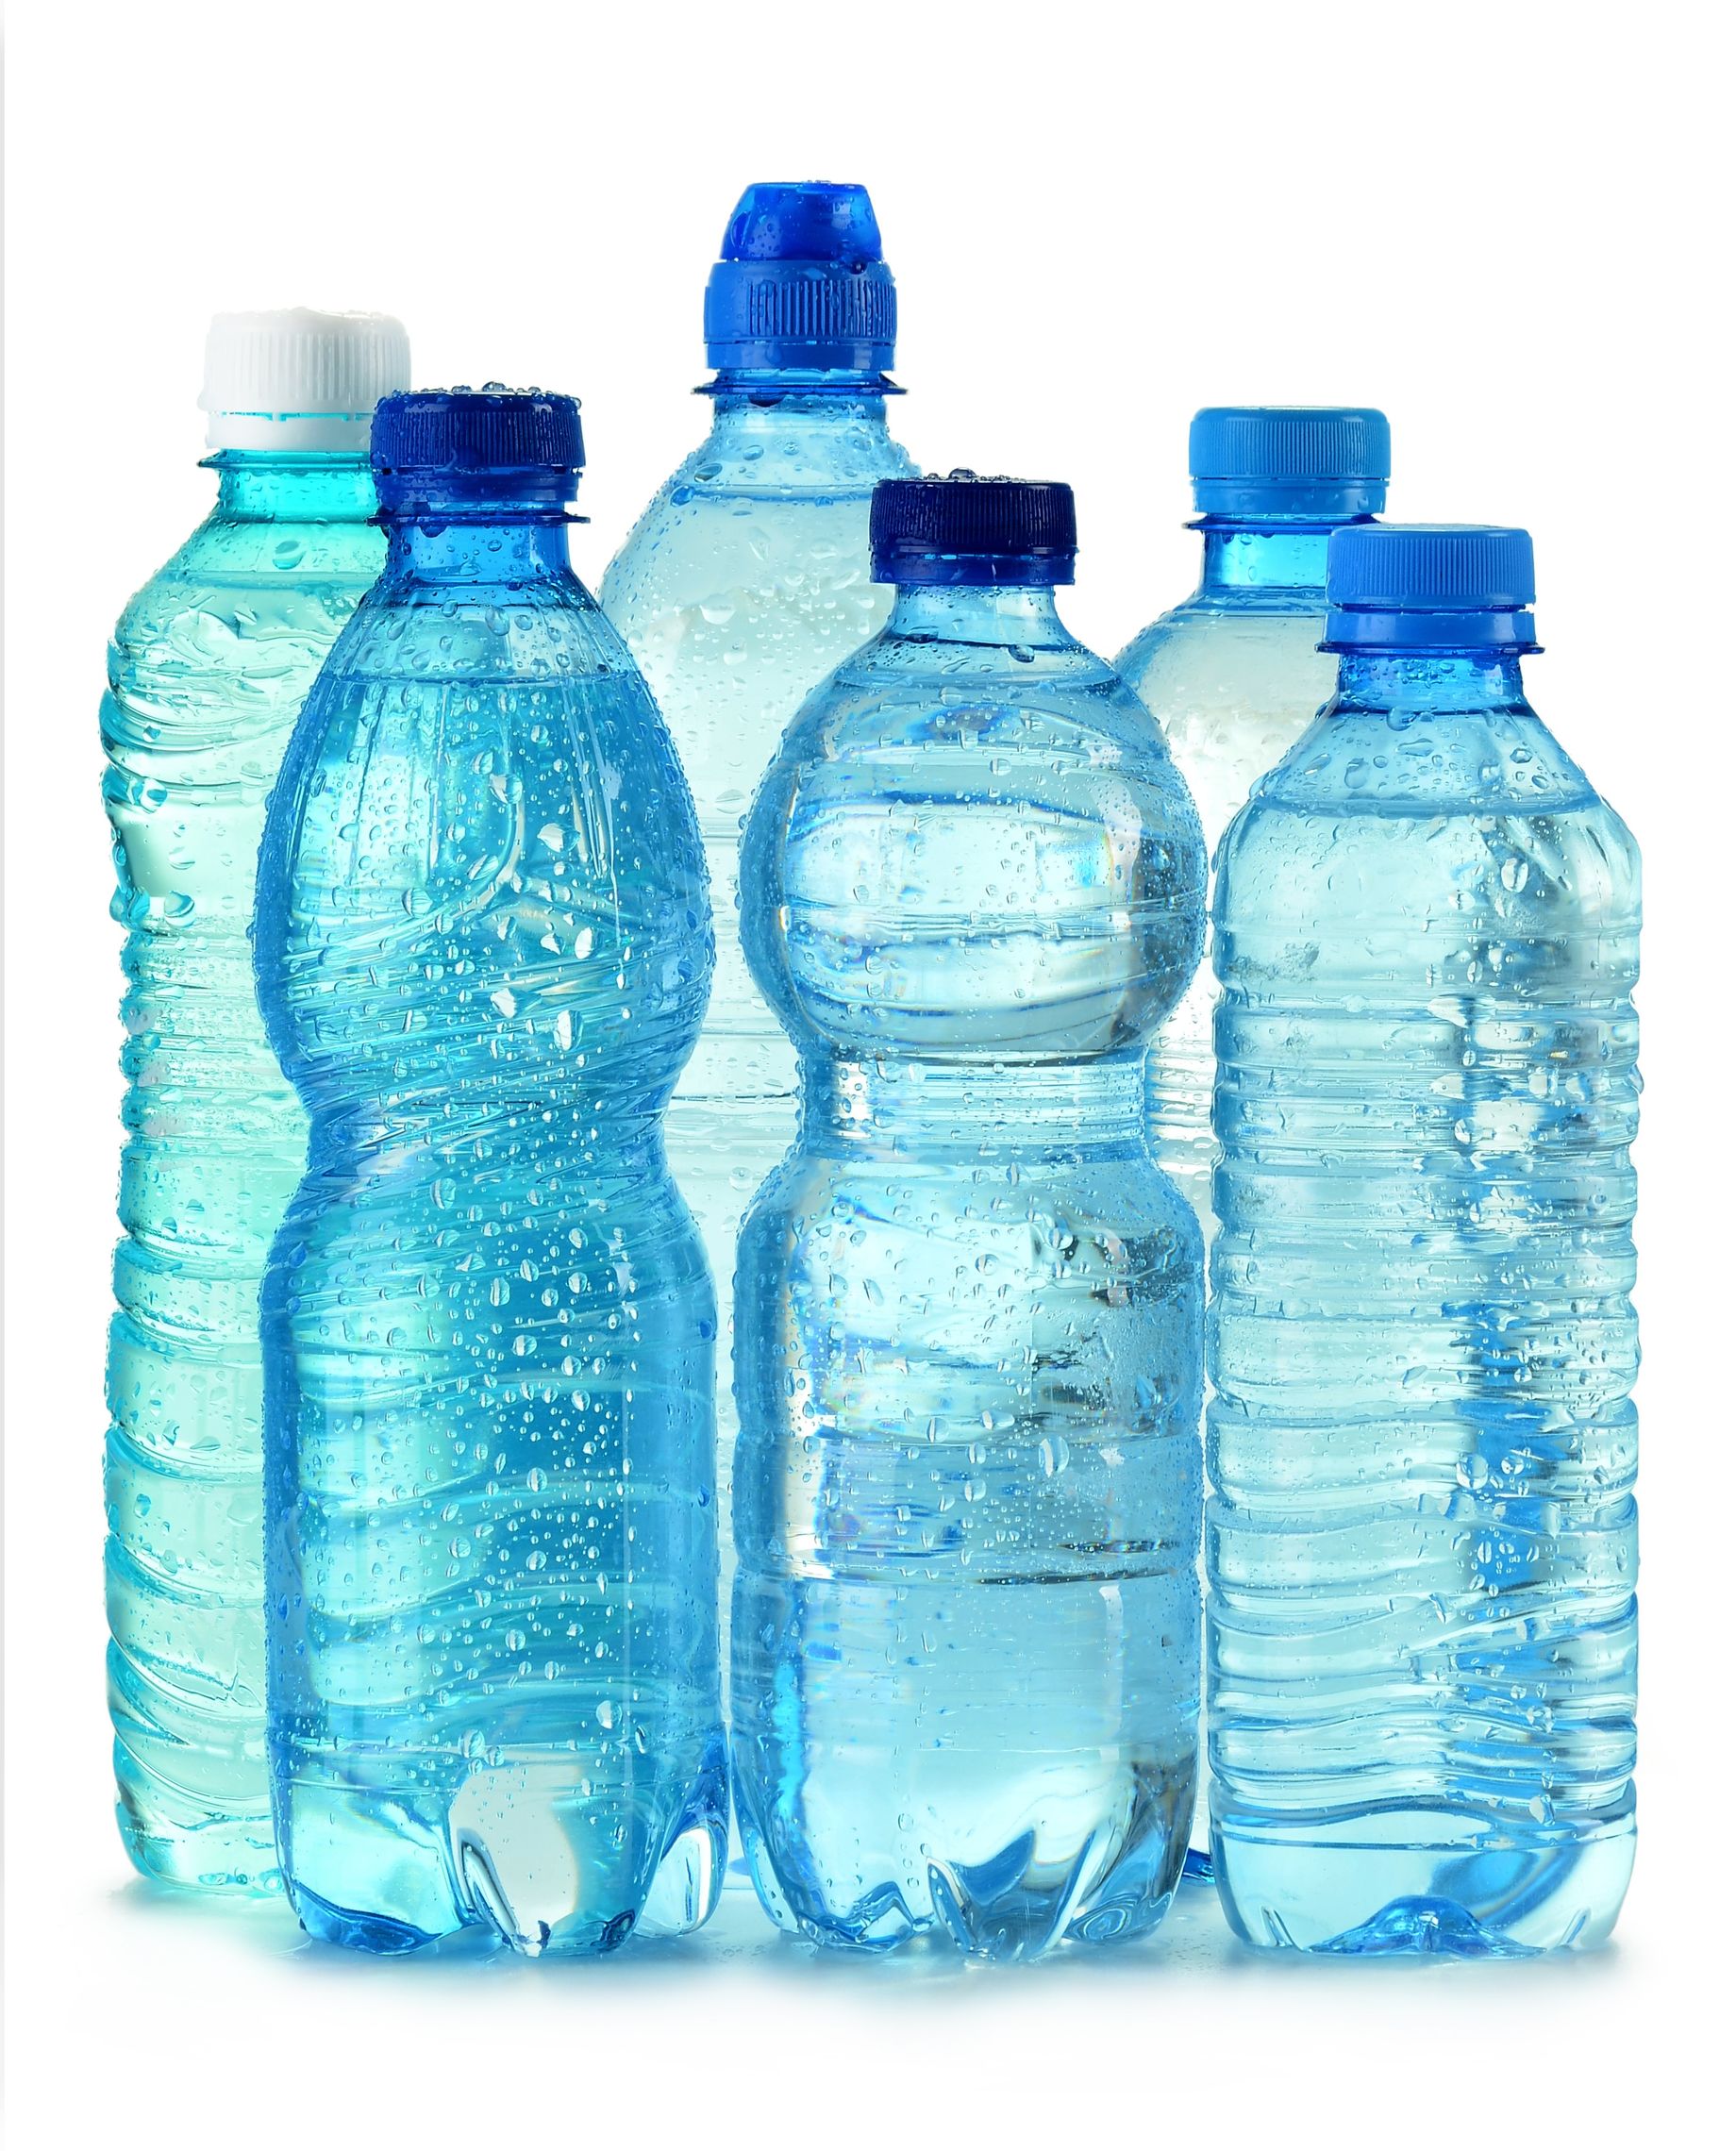 10069237 - polycarbonate plastic bottles of mineral water isolated on white background